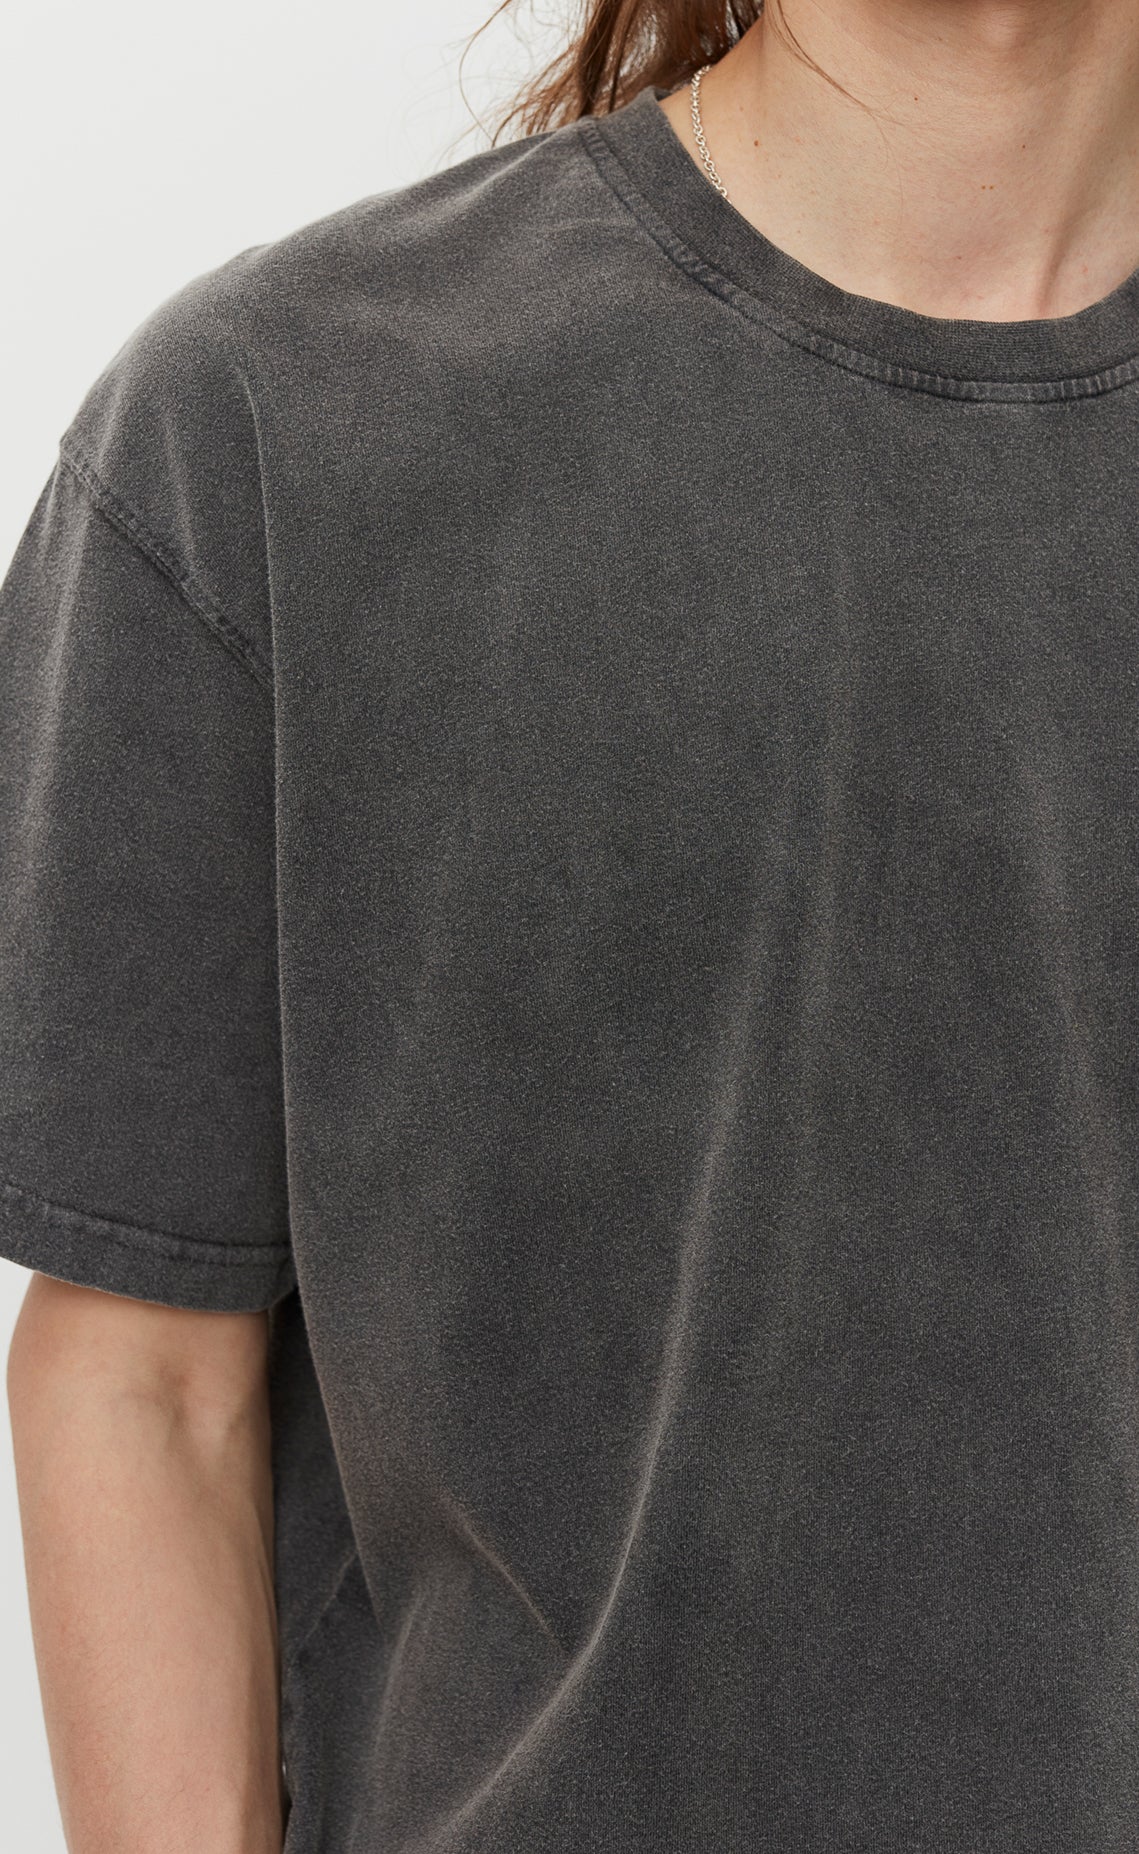 Standard Tee - Washed Graphite-mfpen-W2 Store